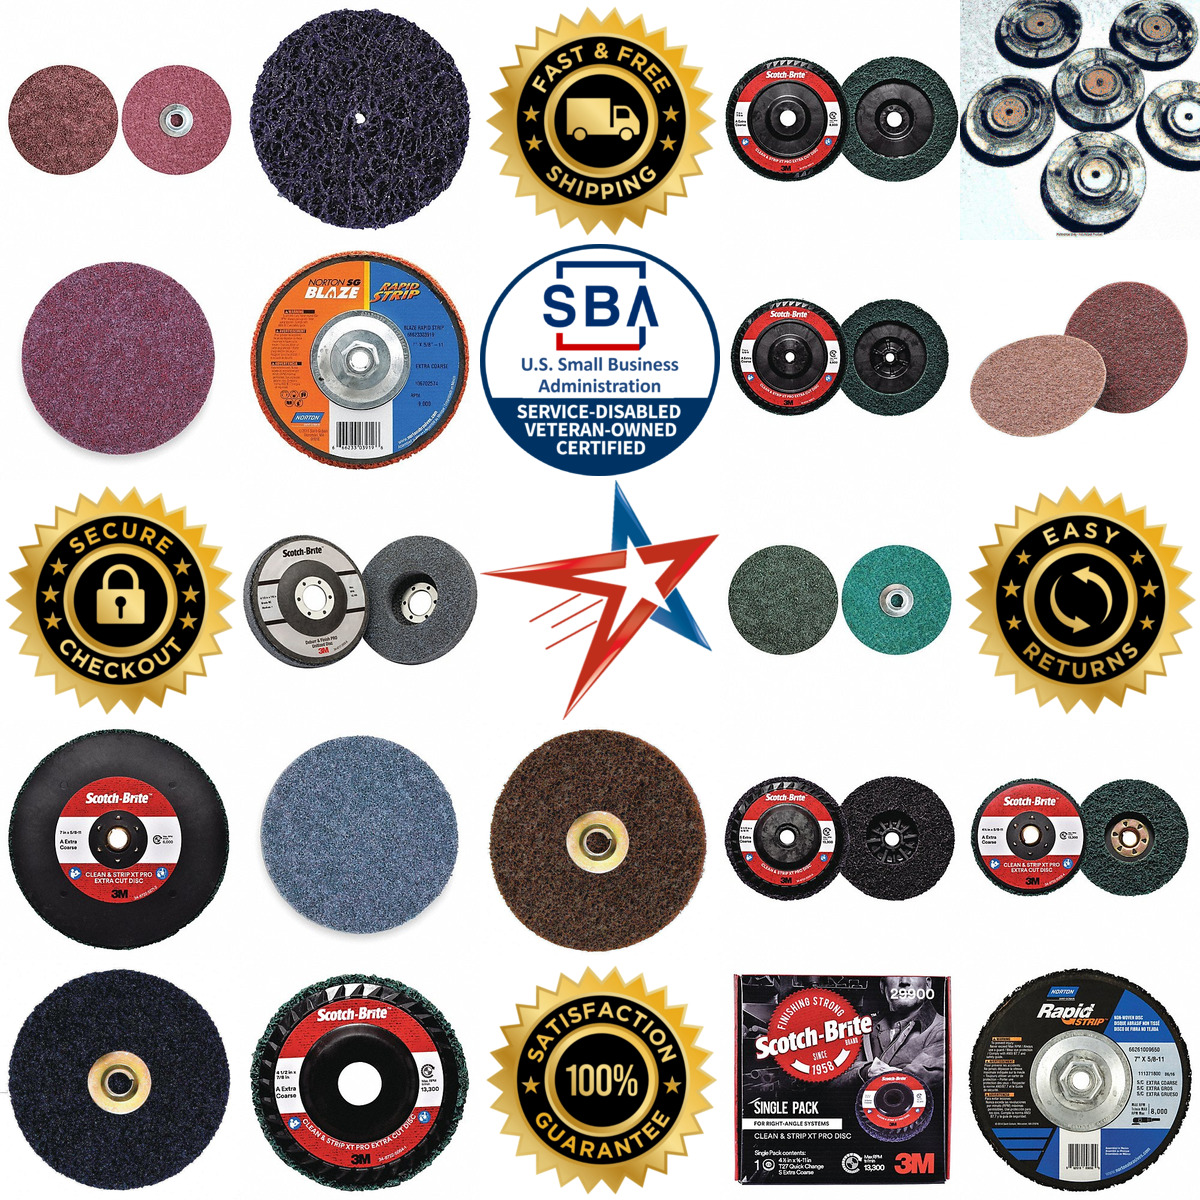 A selection of Non Woven Depressed Center Discs products on GoVets